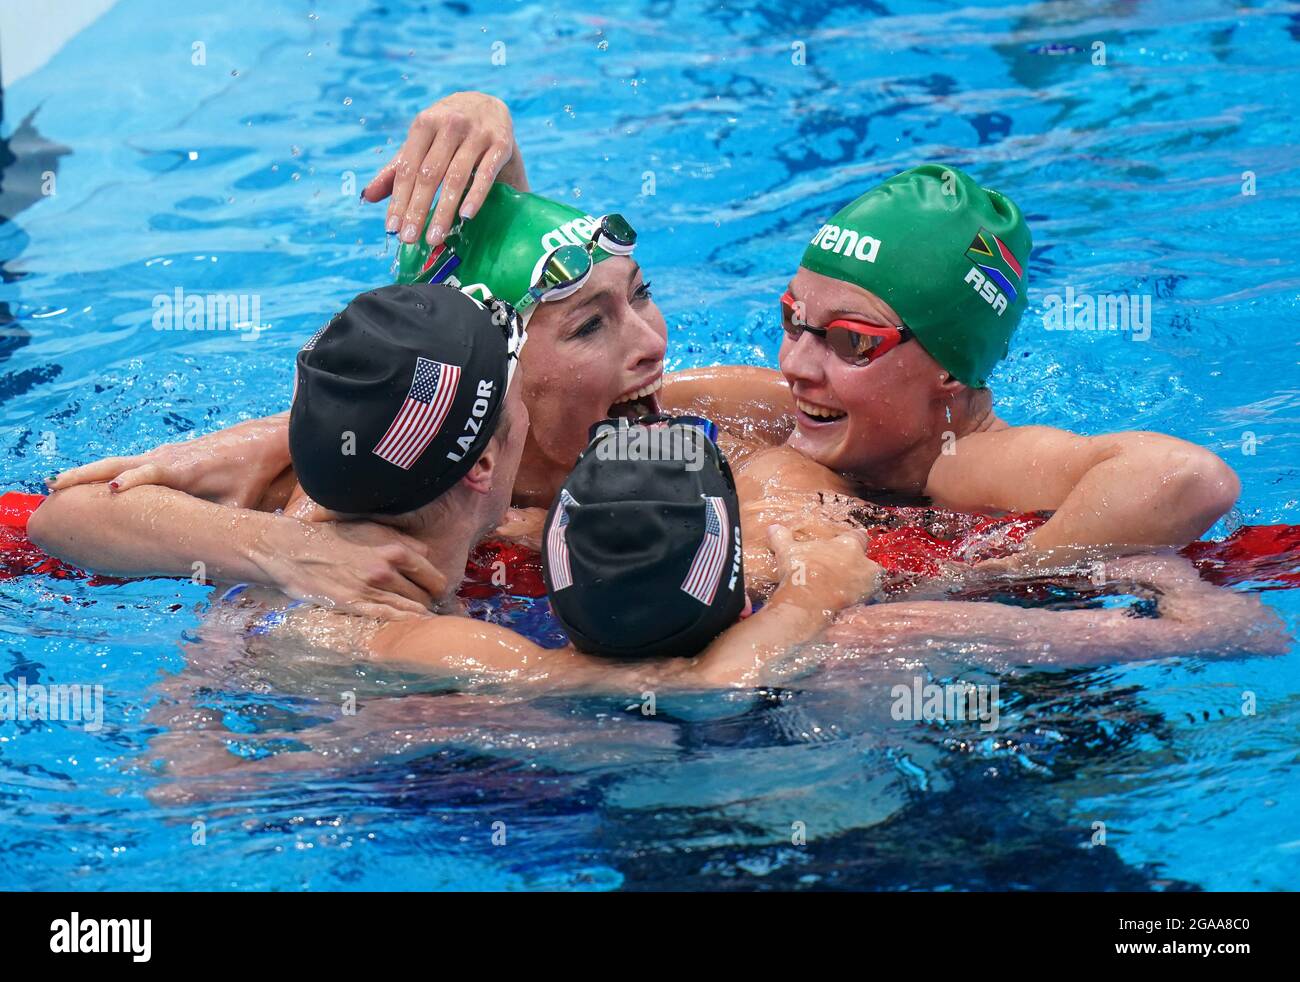 South Africa's Tatjana Schoenmaker congratulated by USA's Annie Lazor and Lilly King after victory in the Women's 200m Breaststroke Final at Tokyo Aquatics Centre on the seventh day of the Tokyo 2020 Olympic Games in Japan. Picture date: Friday July 30, 2021. Stock Photo